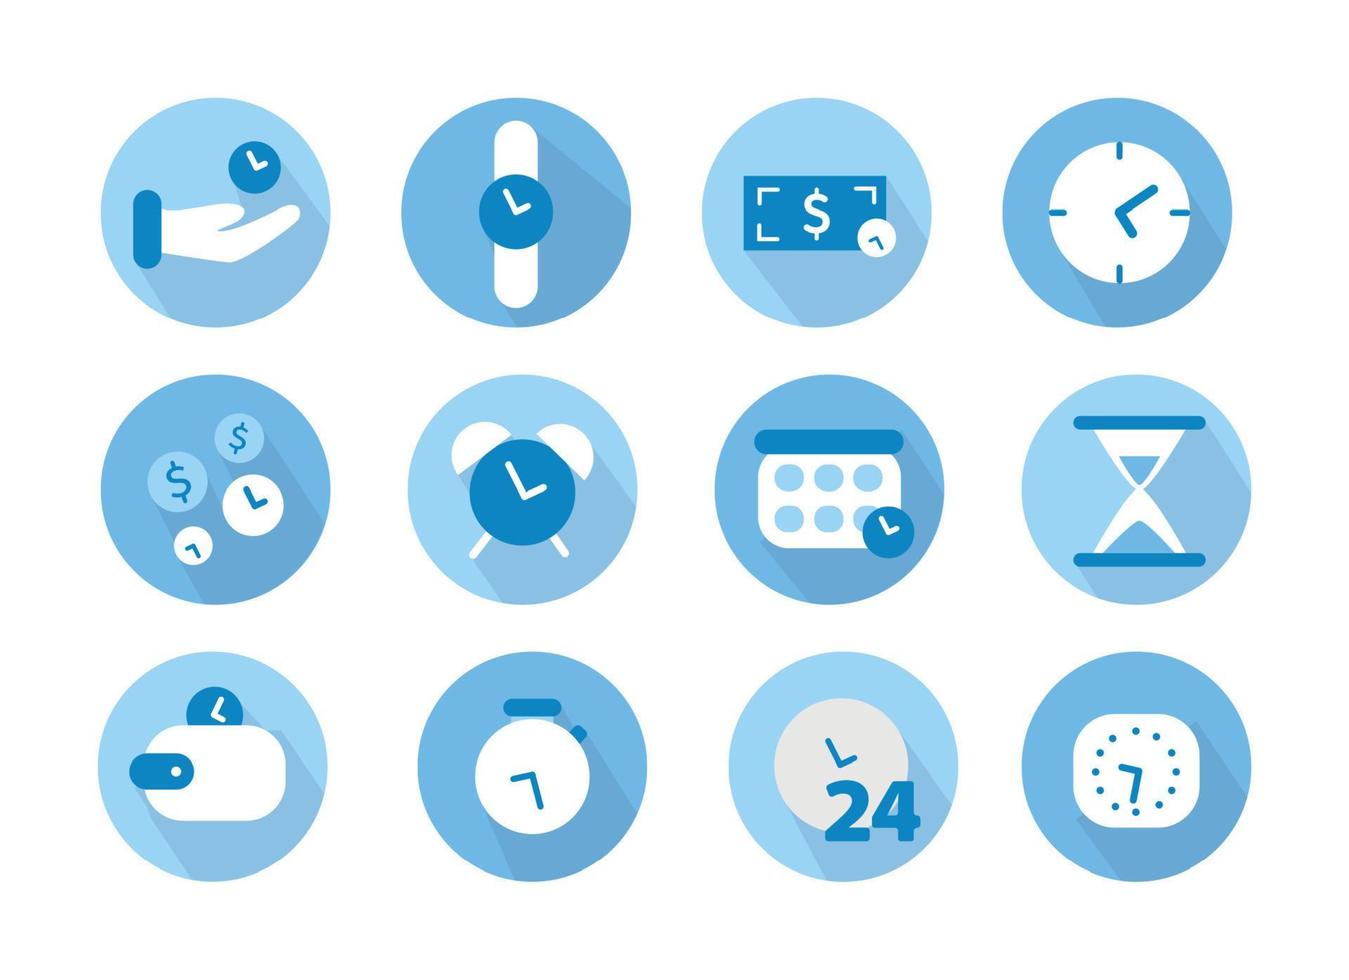 Time management icons set. Elements in the set calendar, alarm clock, hourglass, wristwatch, clock, time is money, timer, time in hand. vector